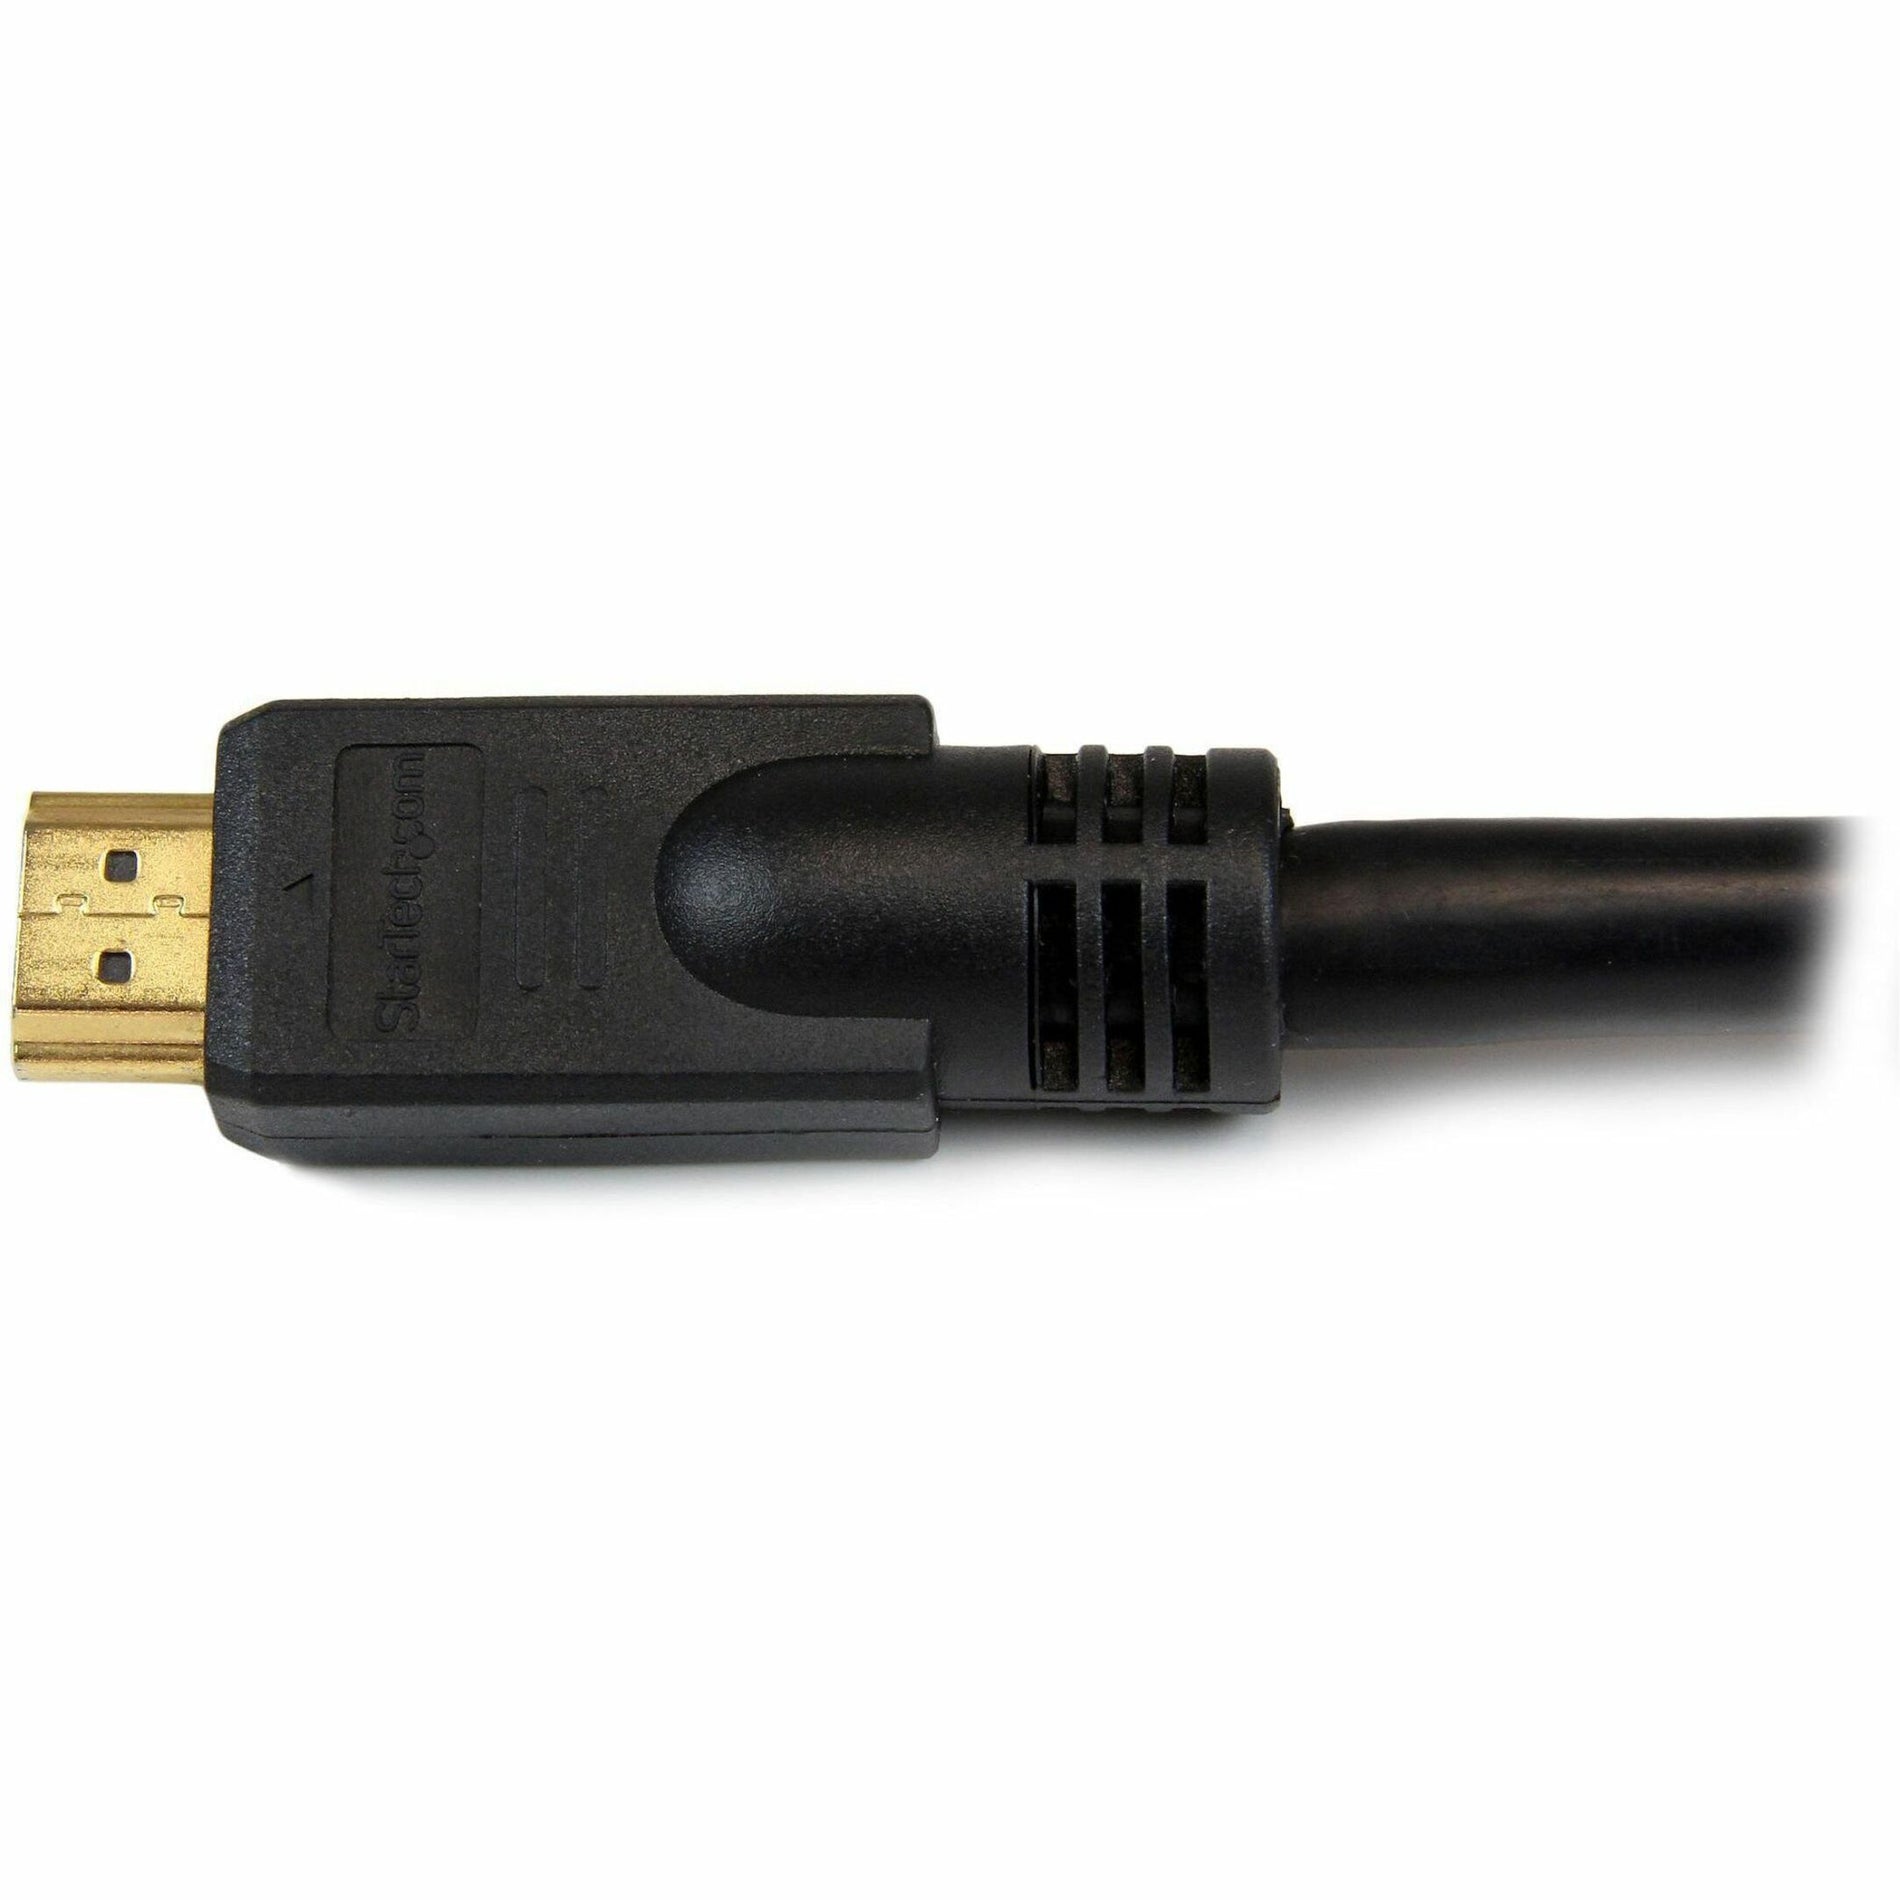 StarTech.com HDMM30 30 ft High Speed HDMI Cable - Ultra HD 4k x 2k HDMI Cable Strain Relief Corrosion-free Molded Gold Plated Connectors Black  「スタートレック・ドットコム」HDMM30 30 フィート 高速 HDMI ケーブル - ウルトラ HD 4k x 2k HDMI ケーブル、ストレイン リリーフ、腐食防止、成形品、ゴールドめっきコネクタ、ブラック